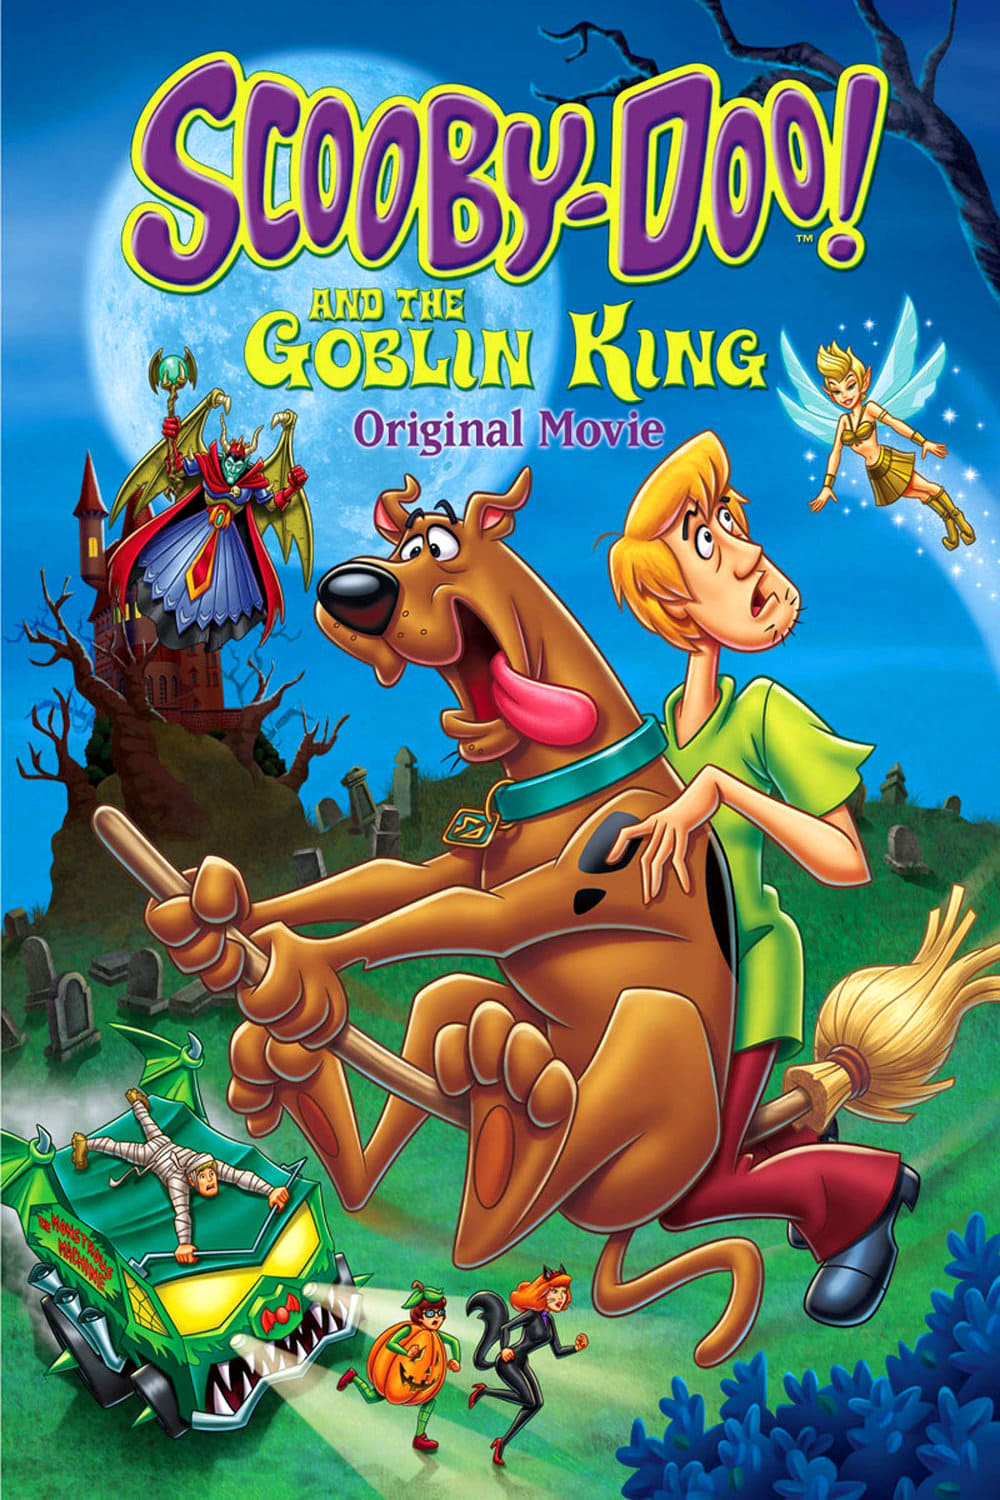 Watch Scooby-Doo and the Goblin King (2008) Full Movie Online - Plex